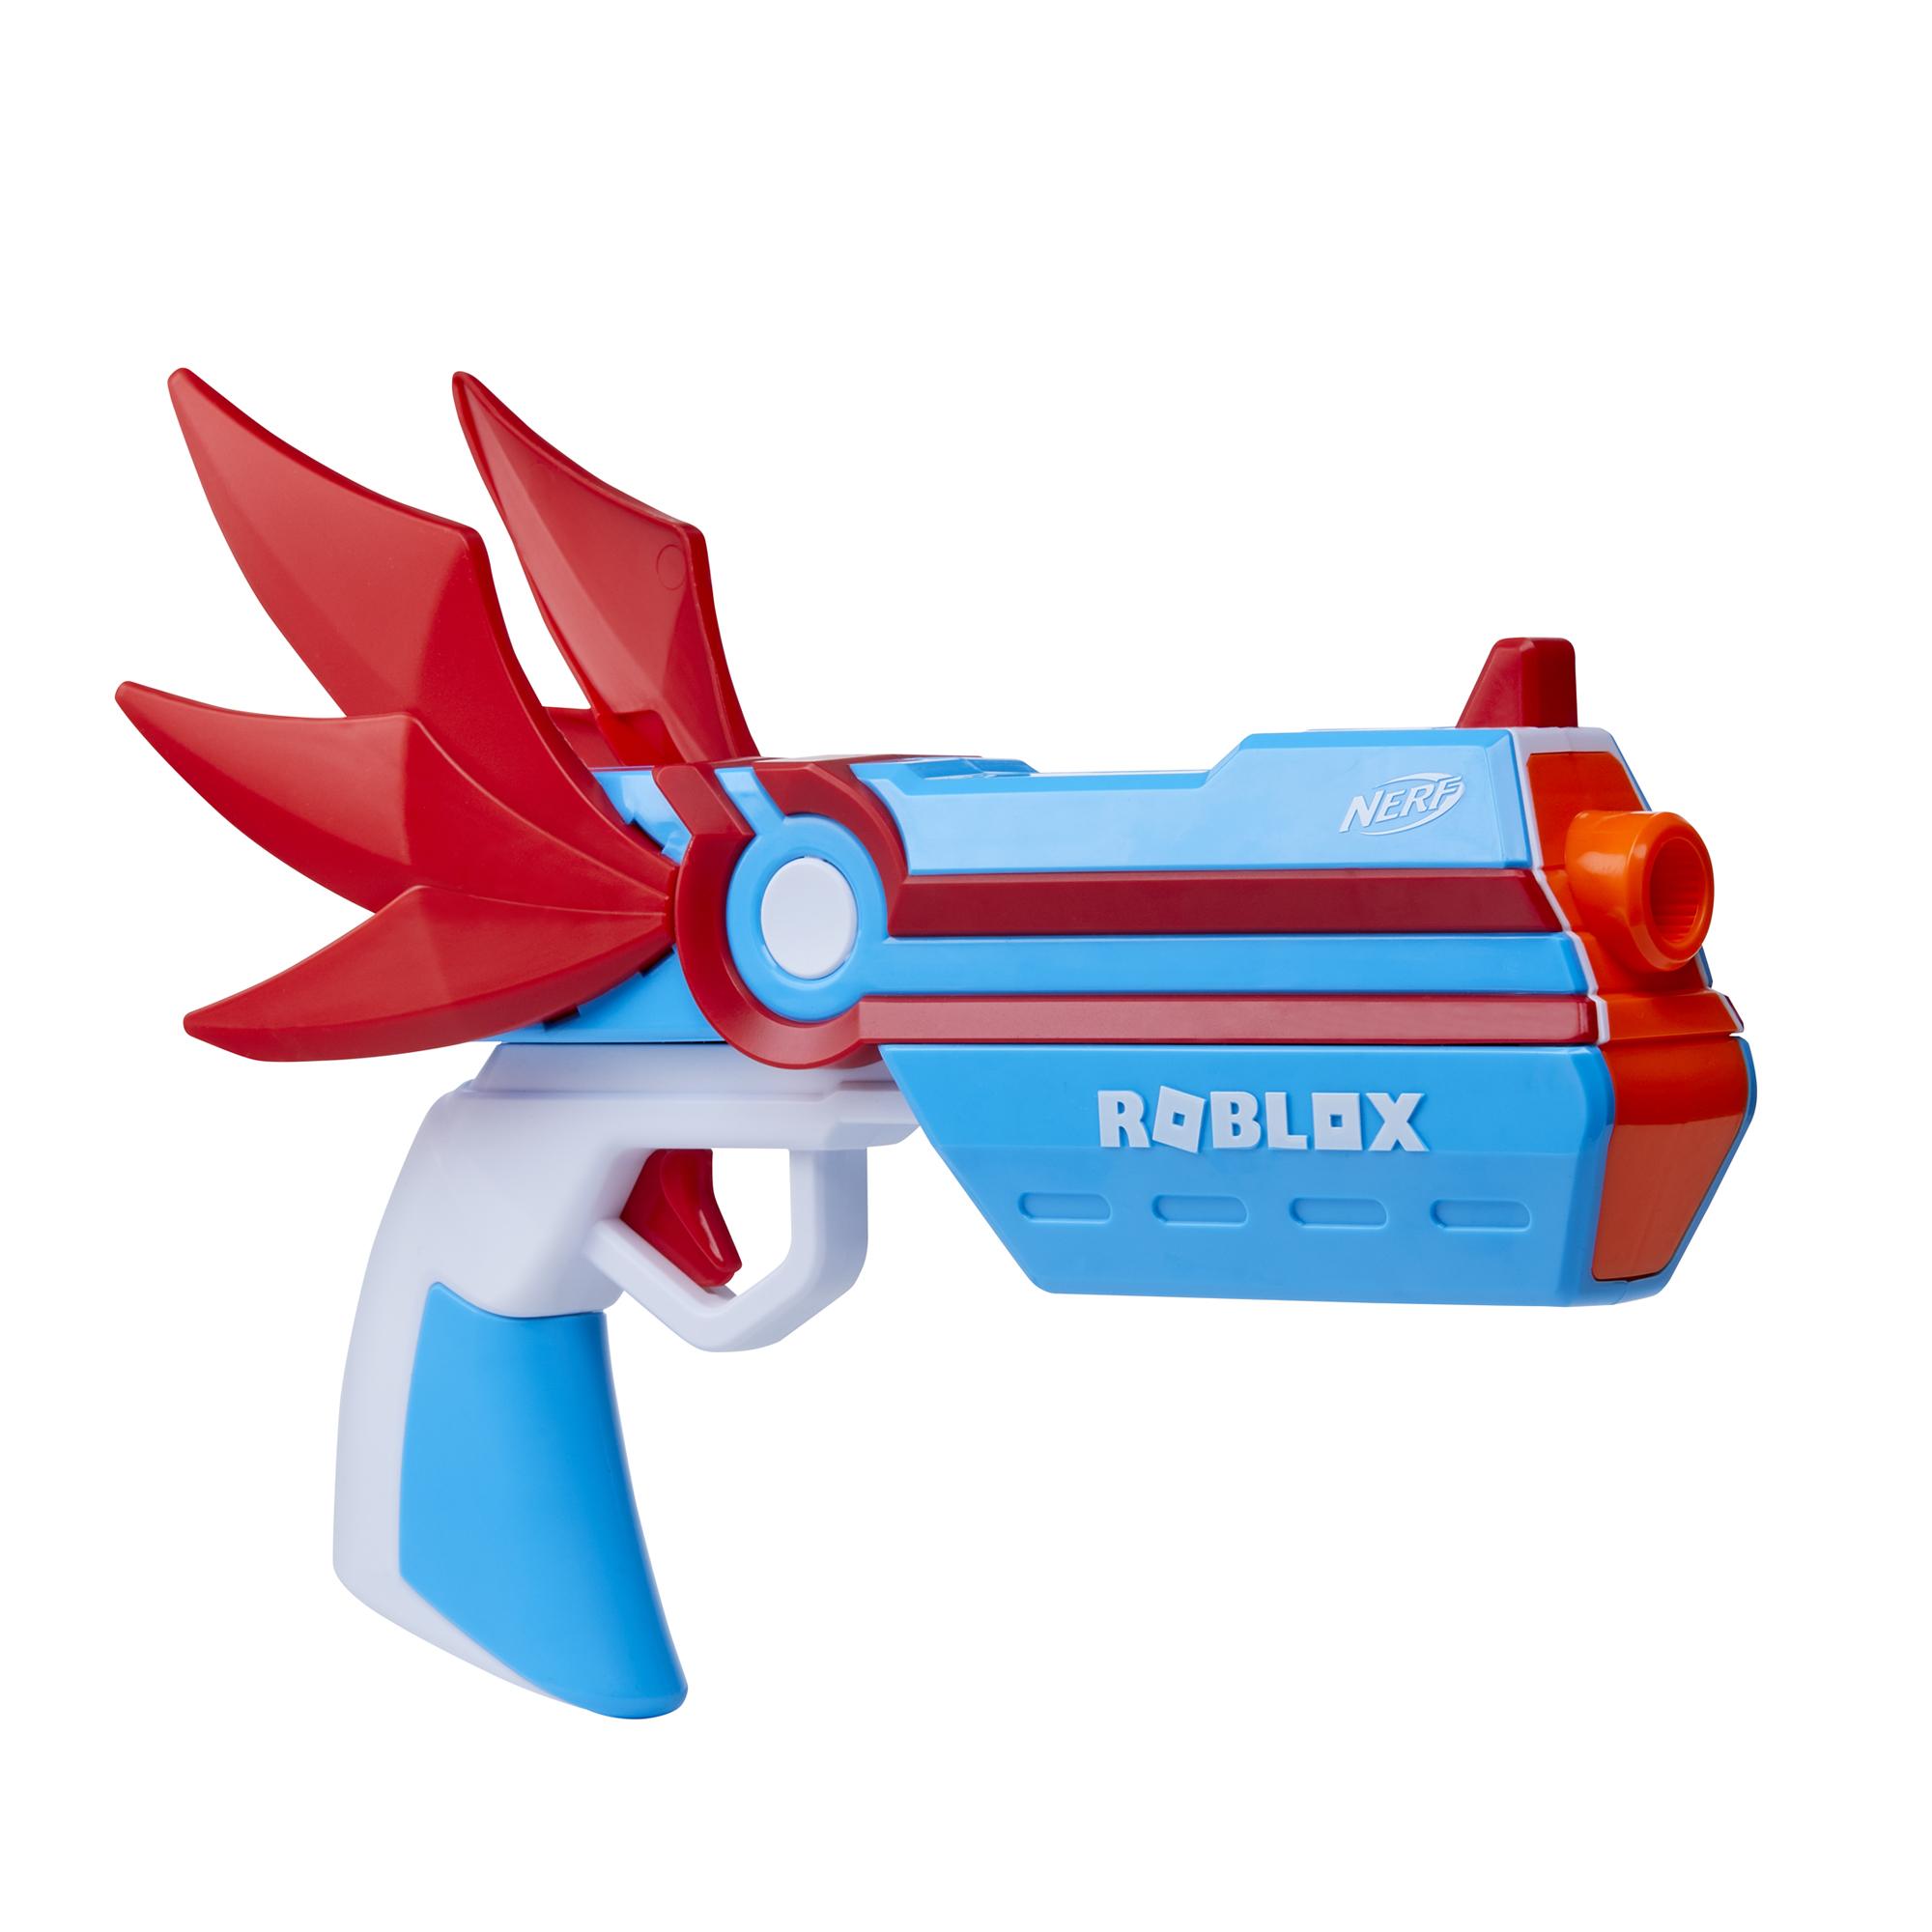 All Roblox Nerf Guns & Blasters Listed (With Pictures)